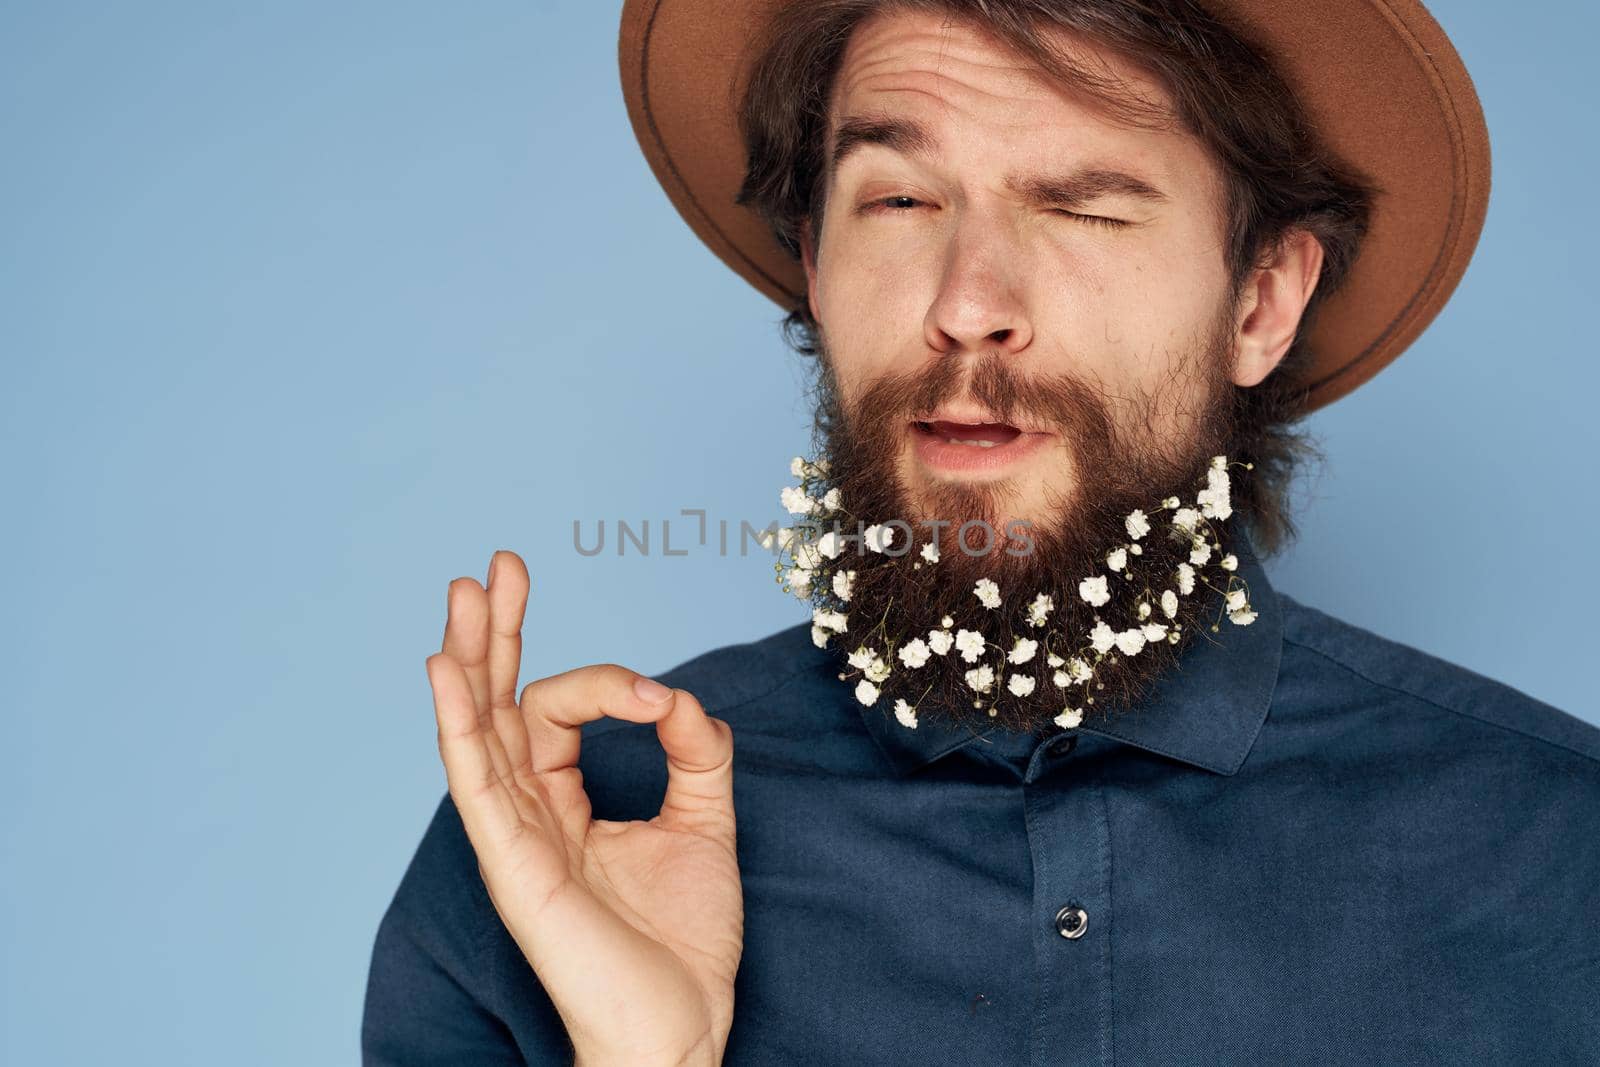 Cute man in a hat flowers in a beard emotions close-up blue background. High quality photo